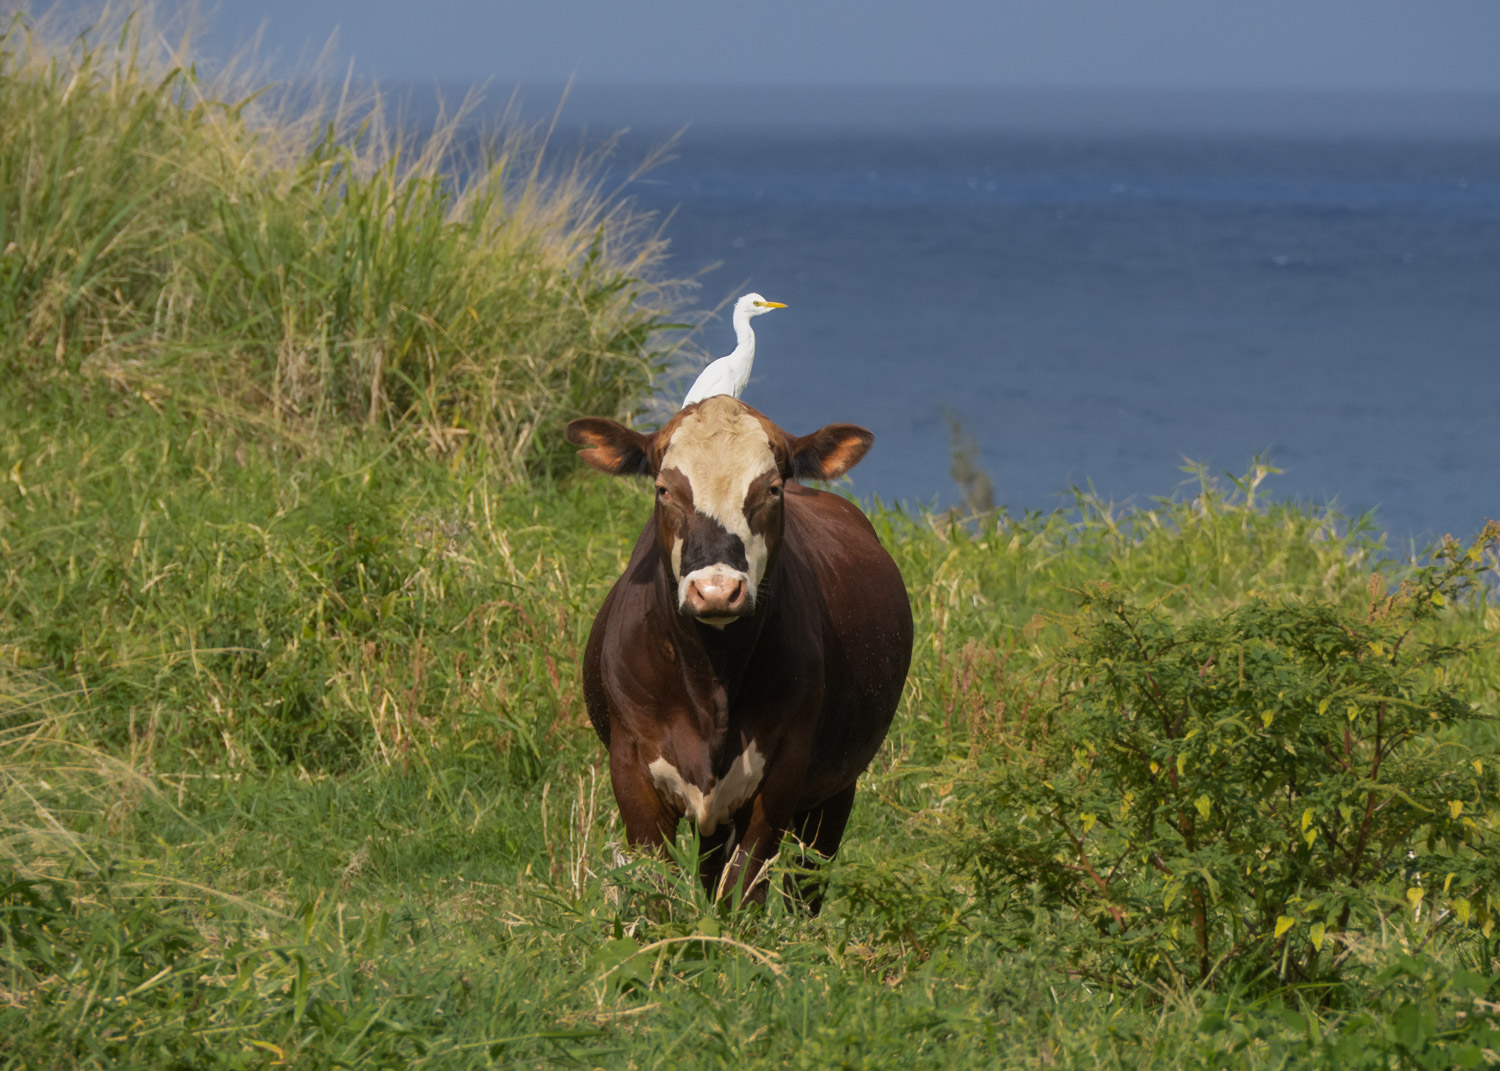 Cow and egret.